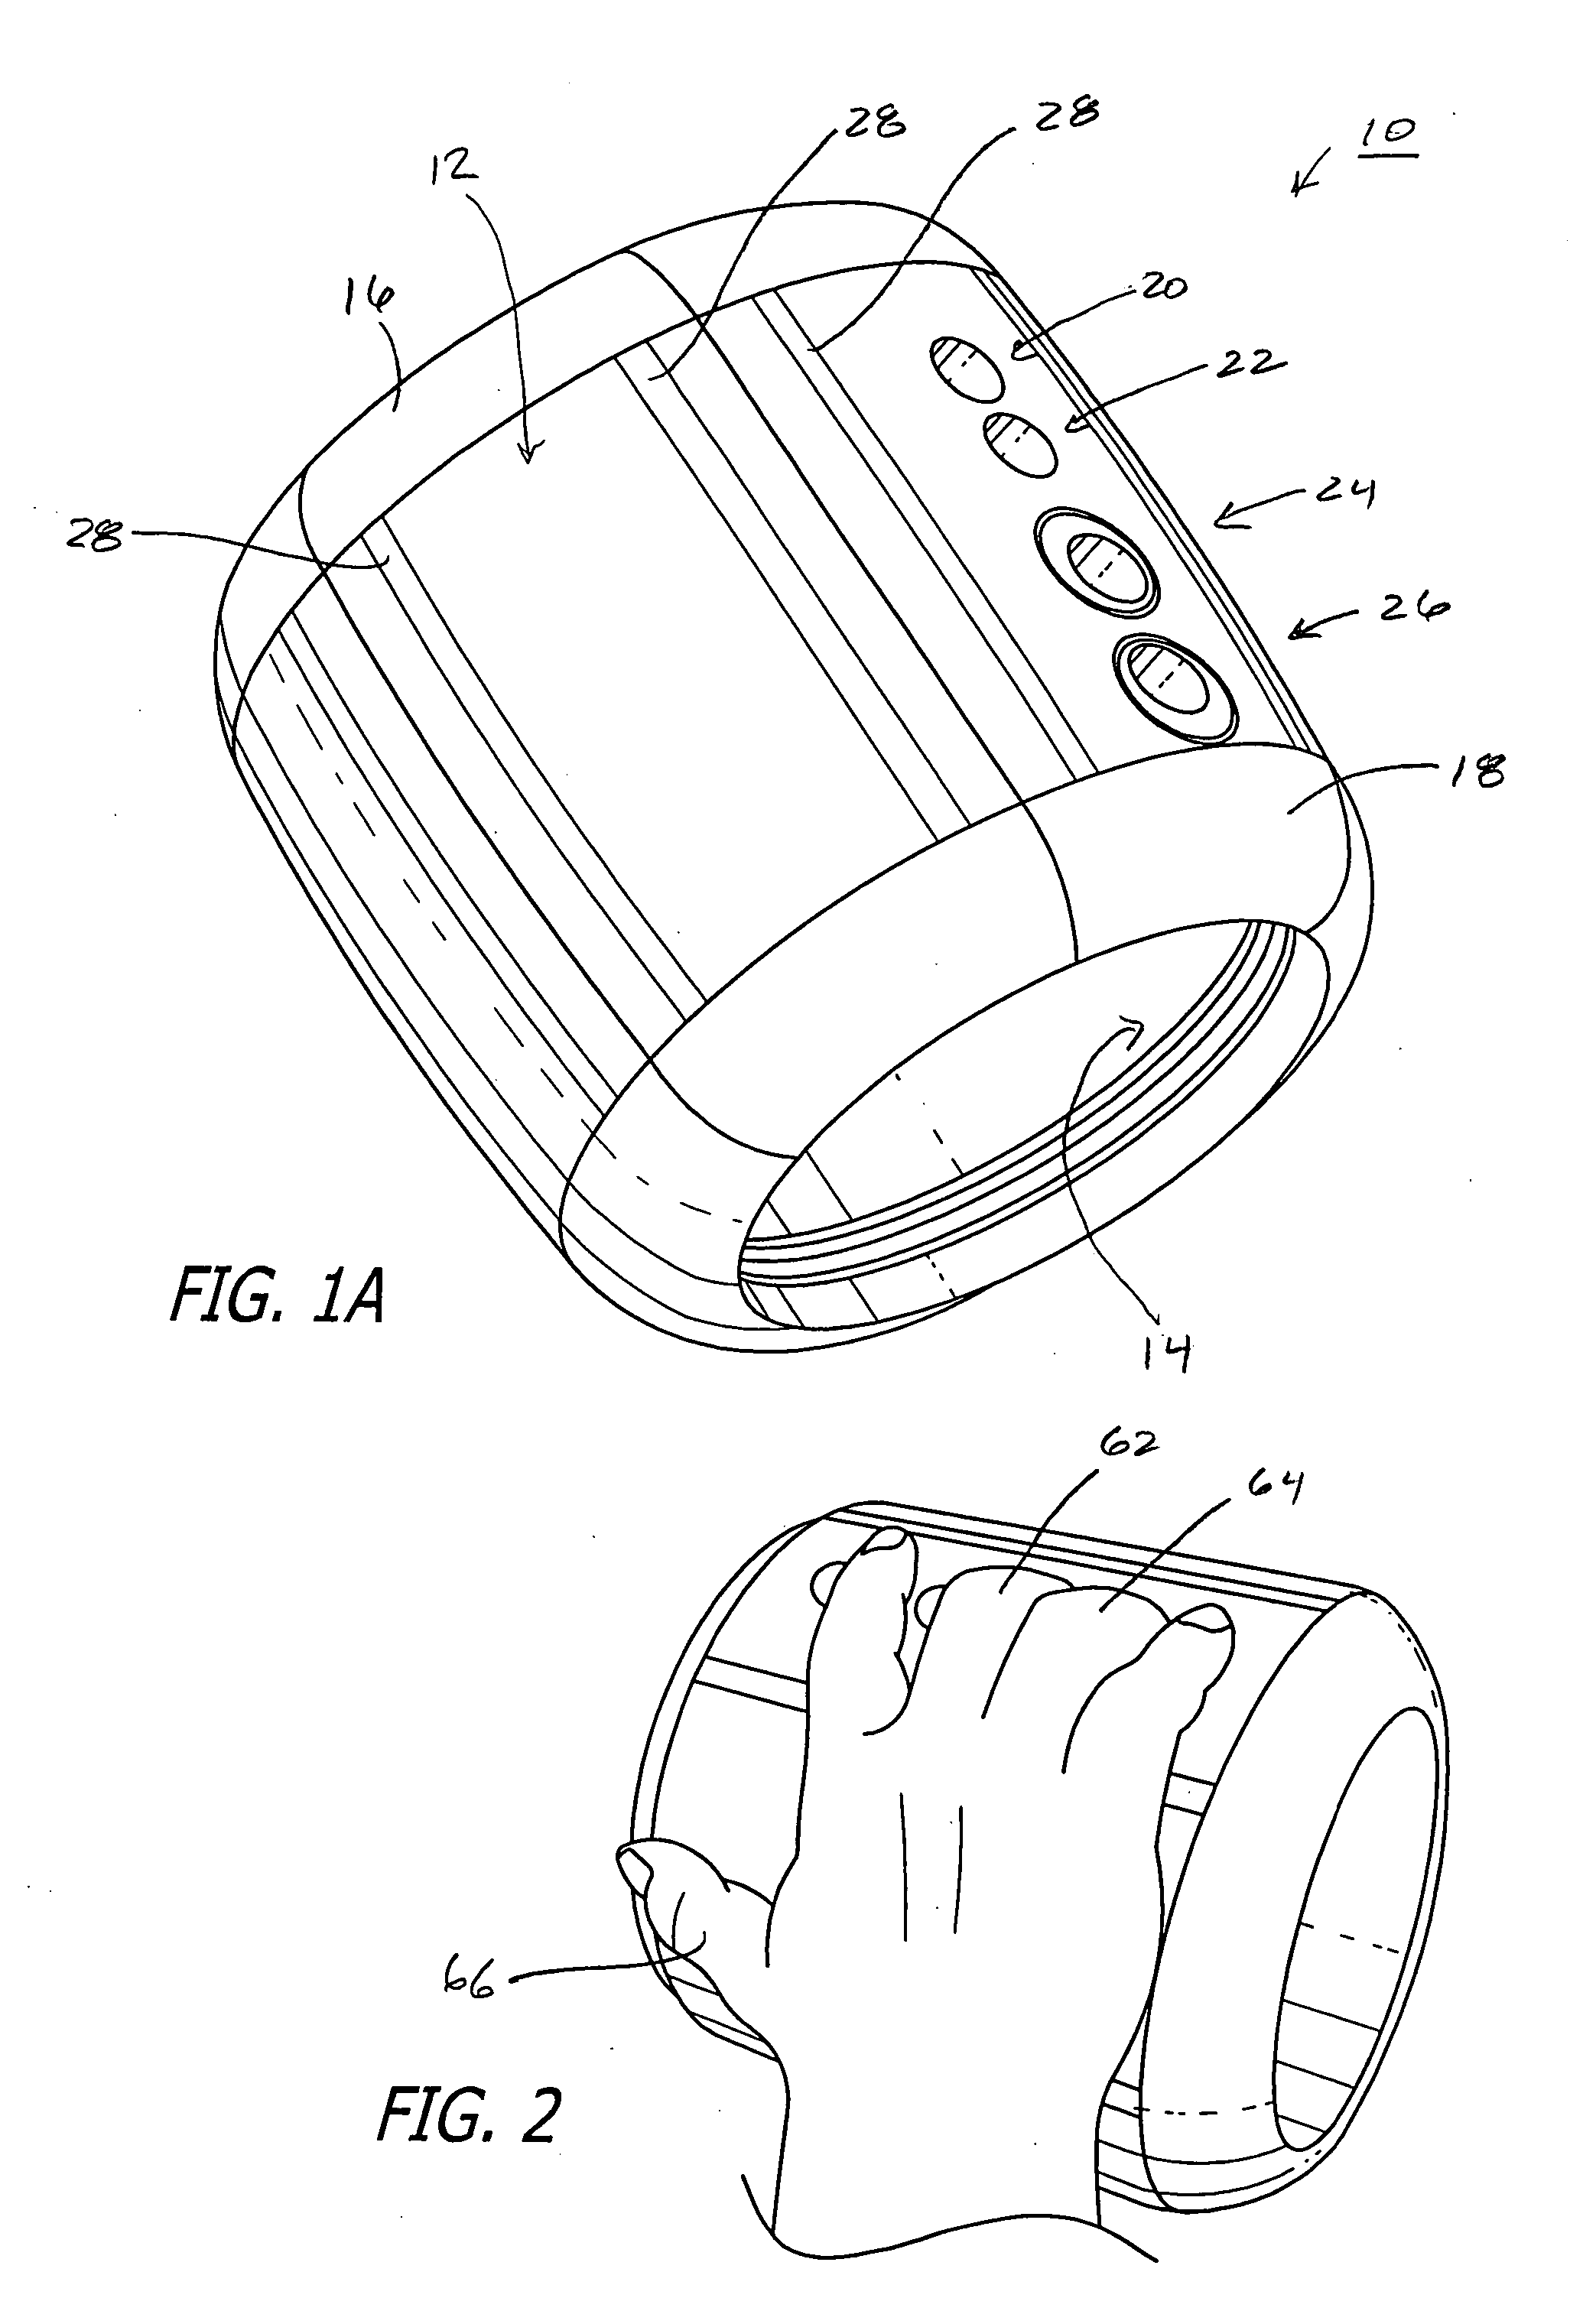 Bowling practice device